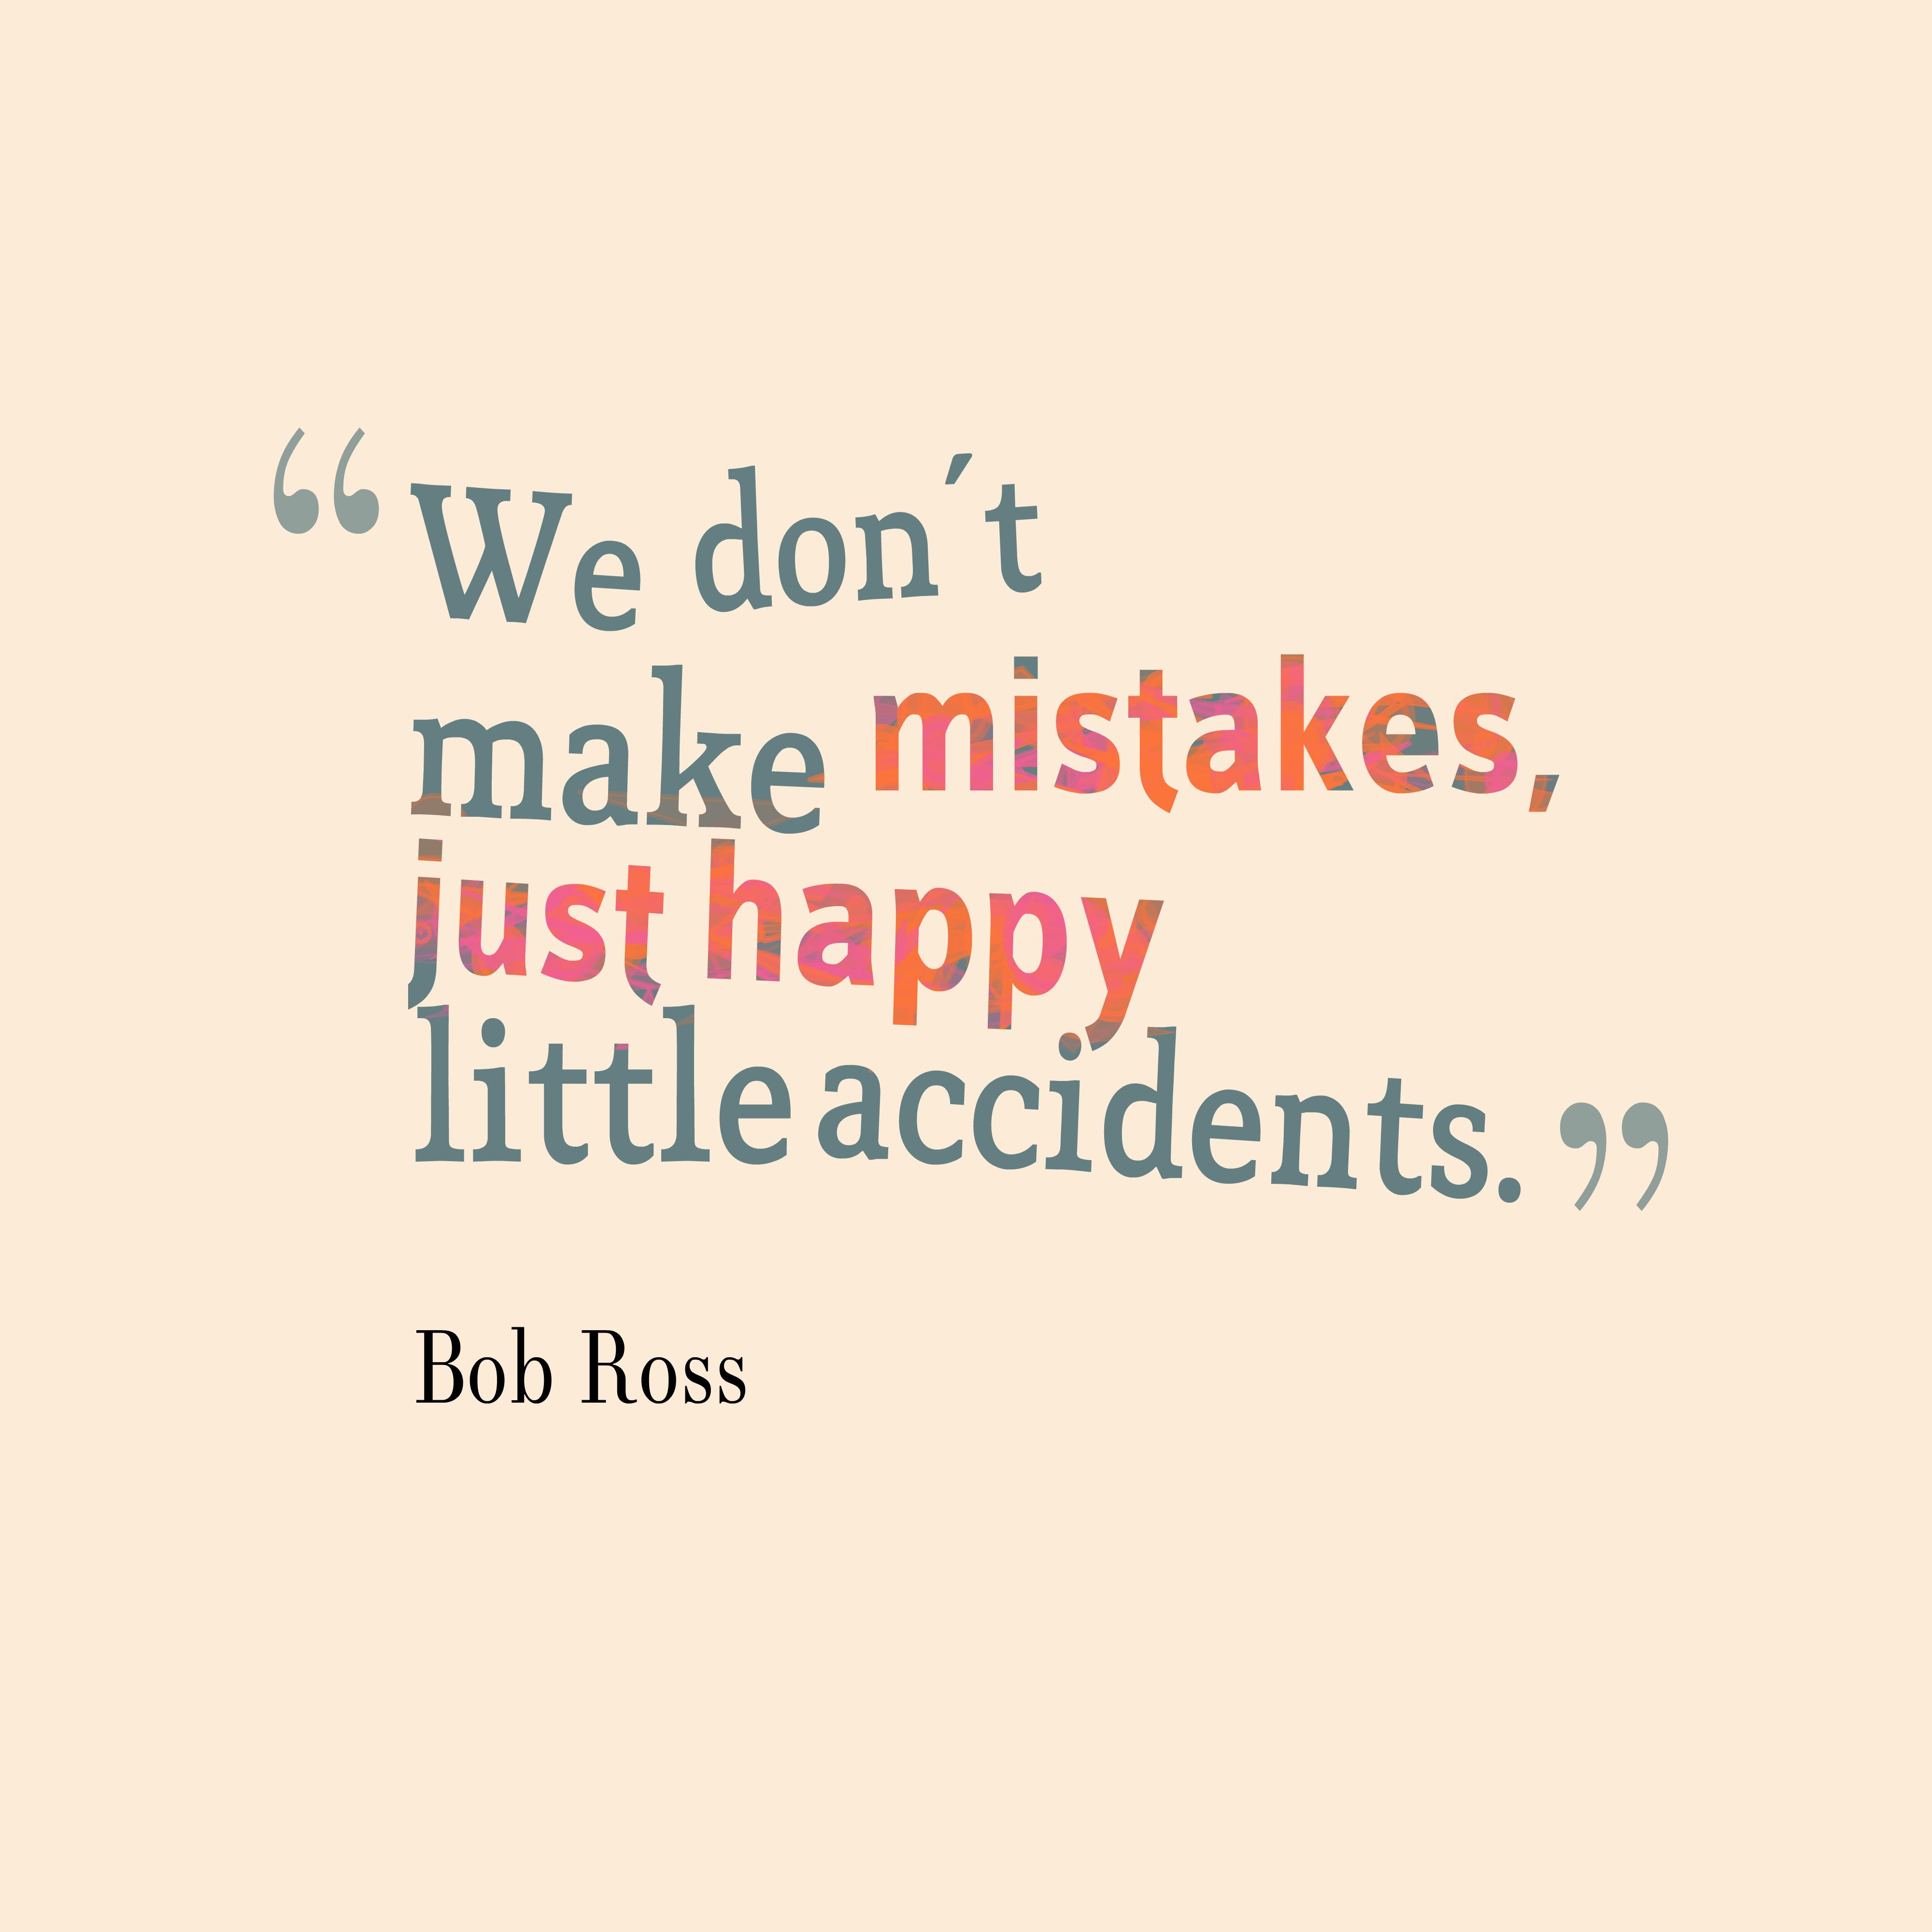 We don’t make mistakes, just happy little accidents. Bob Ross